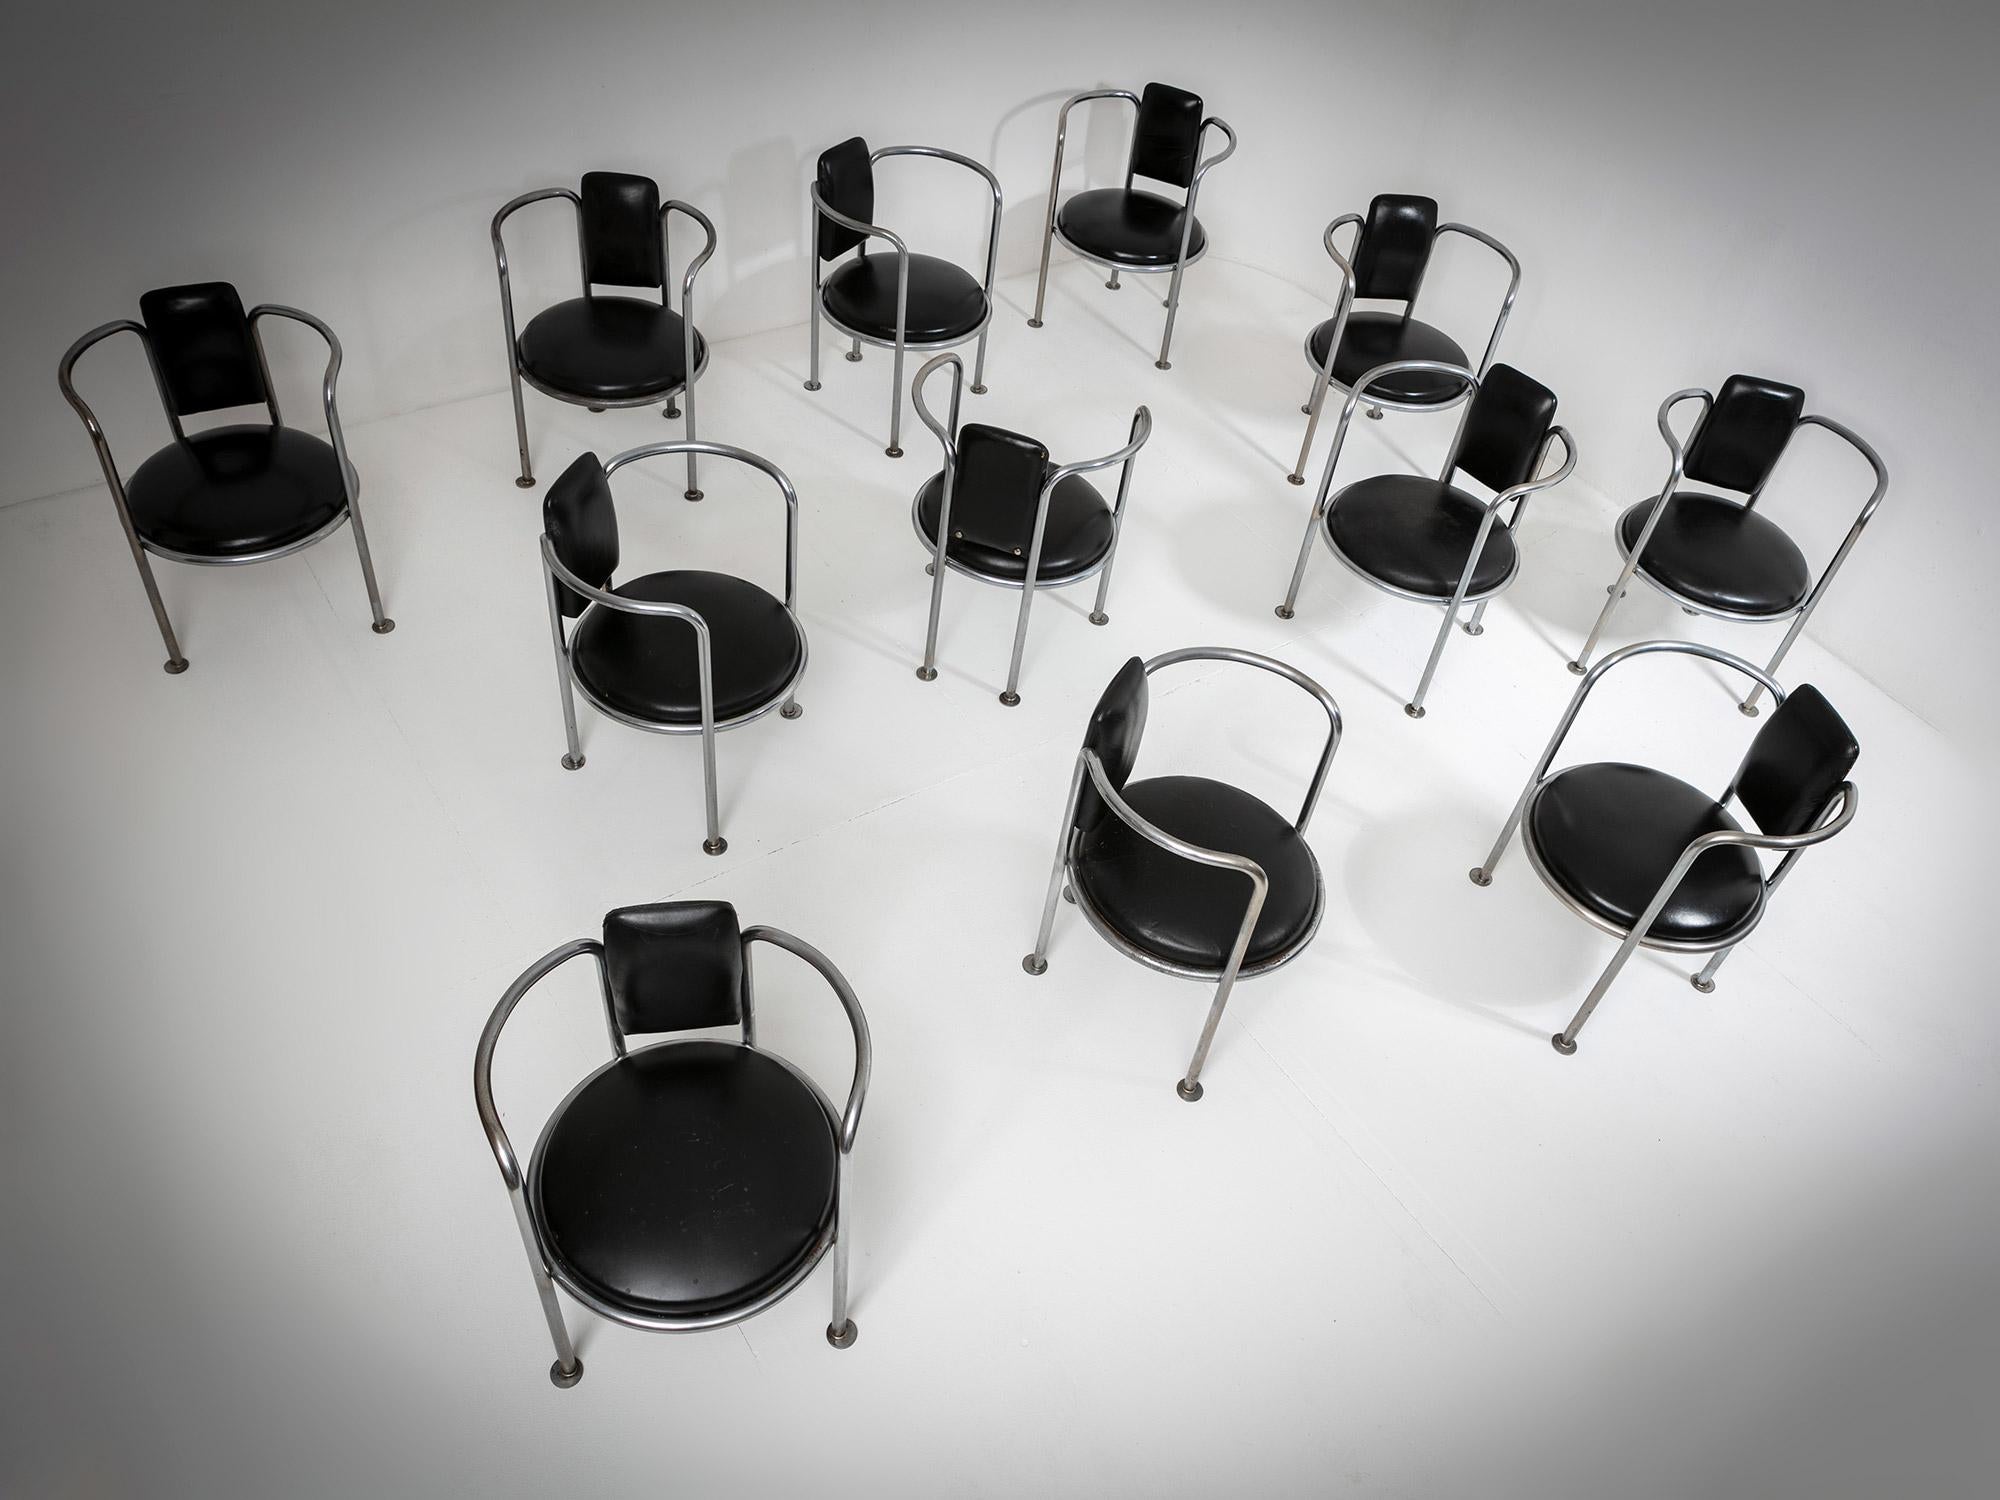 Metal 10 Chrome Black Leather Armchairs in the style of Gae Aulenti Poltronova, 1960s For Sale